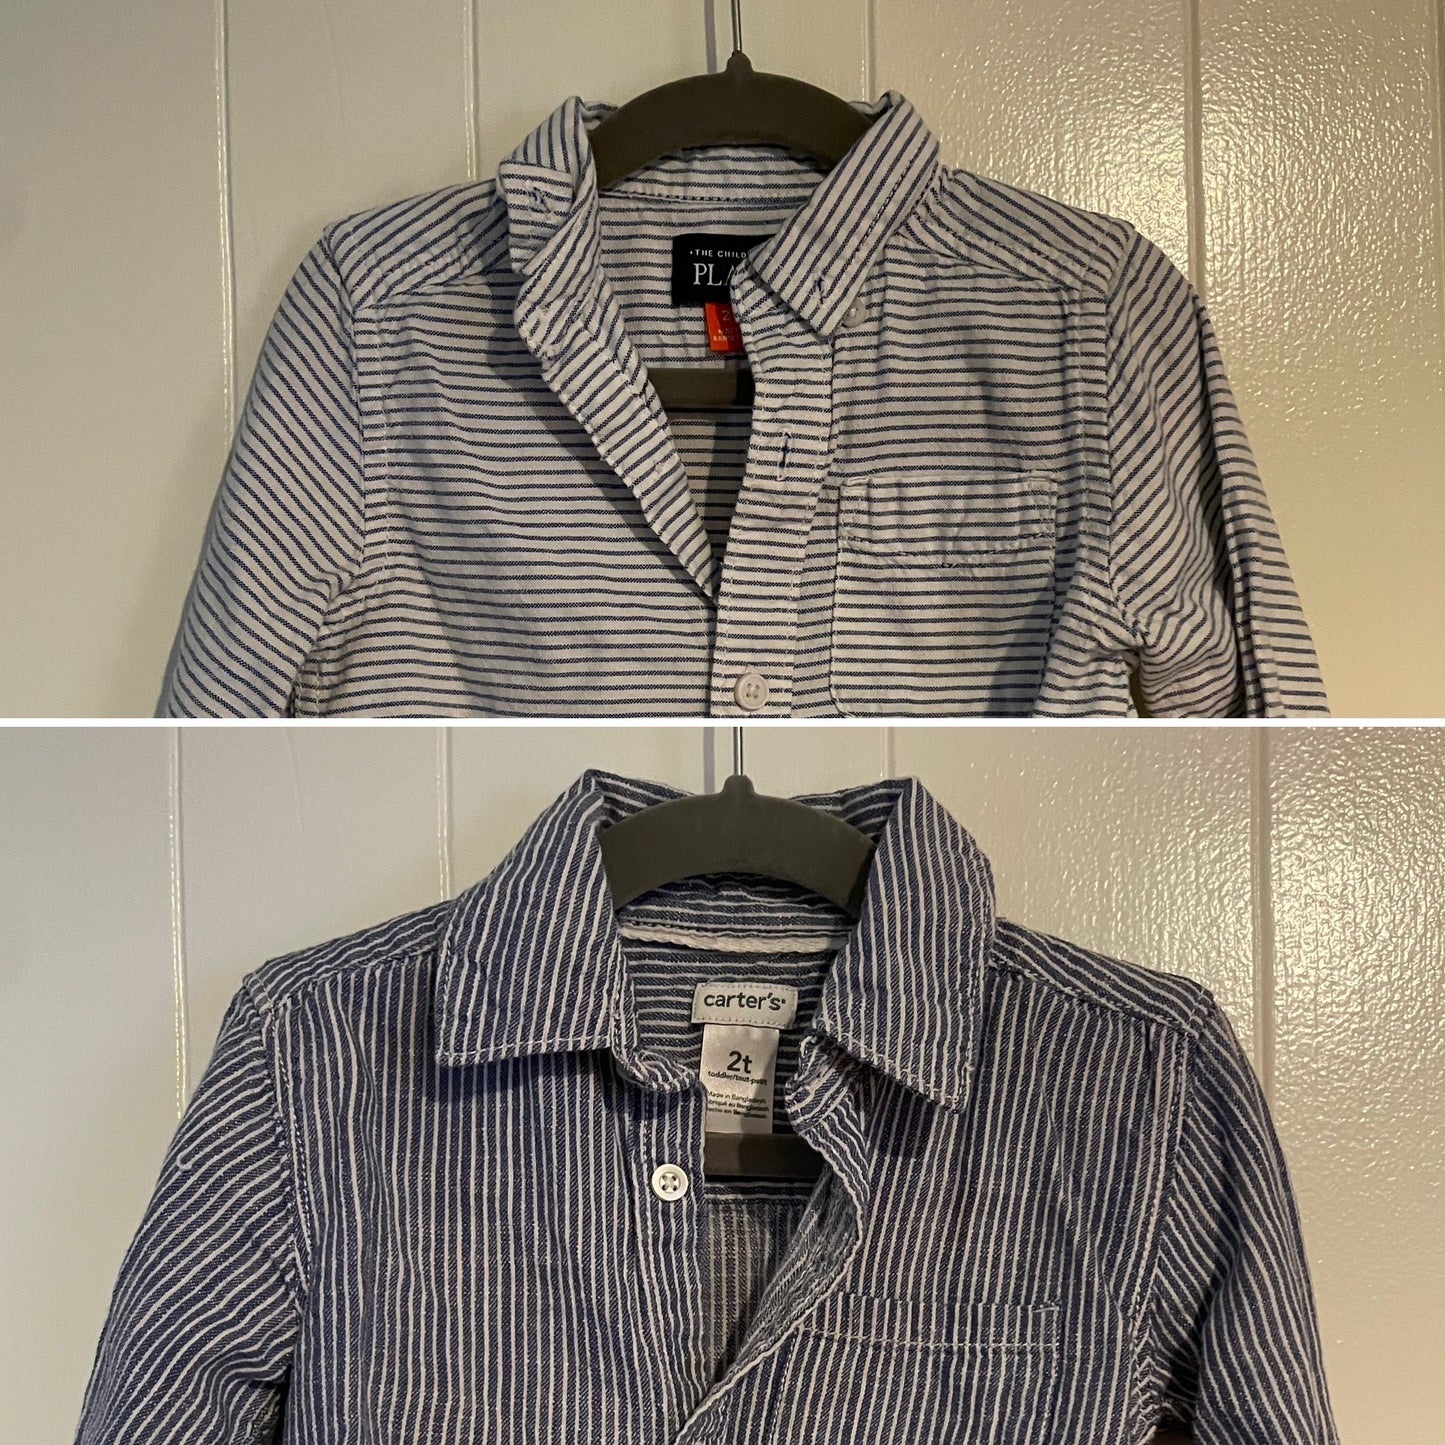 REDUCED Button up shirts toddler 2t